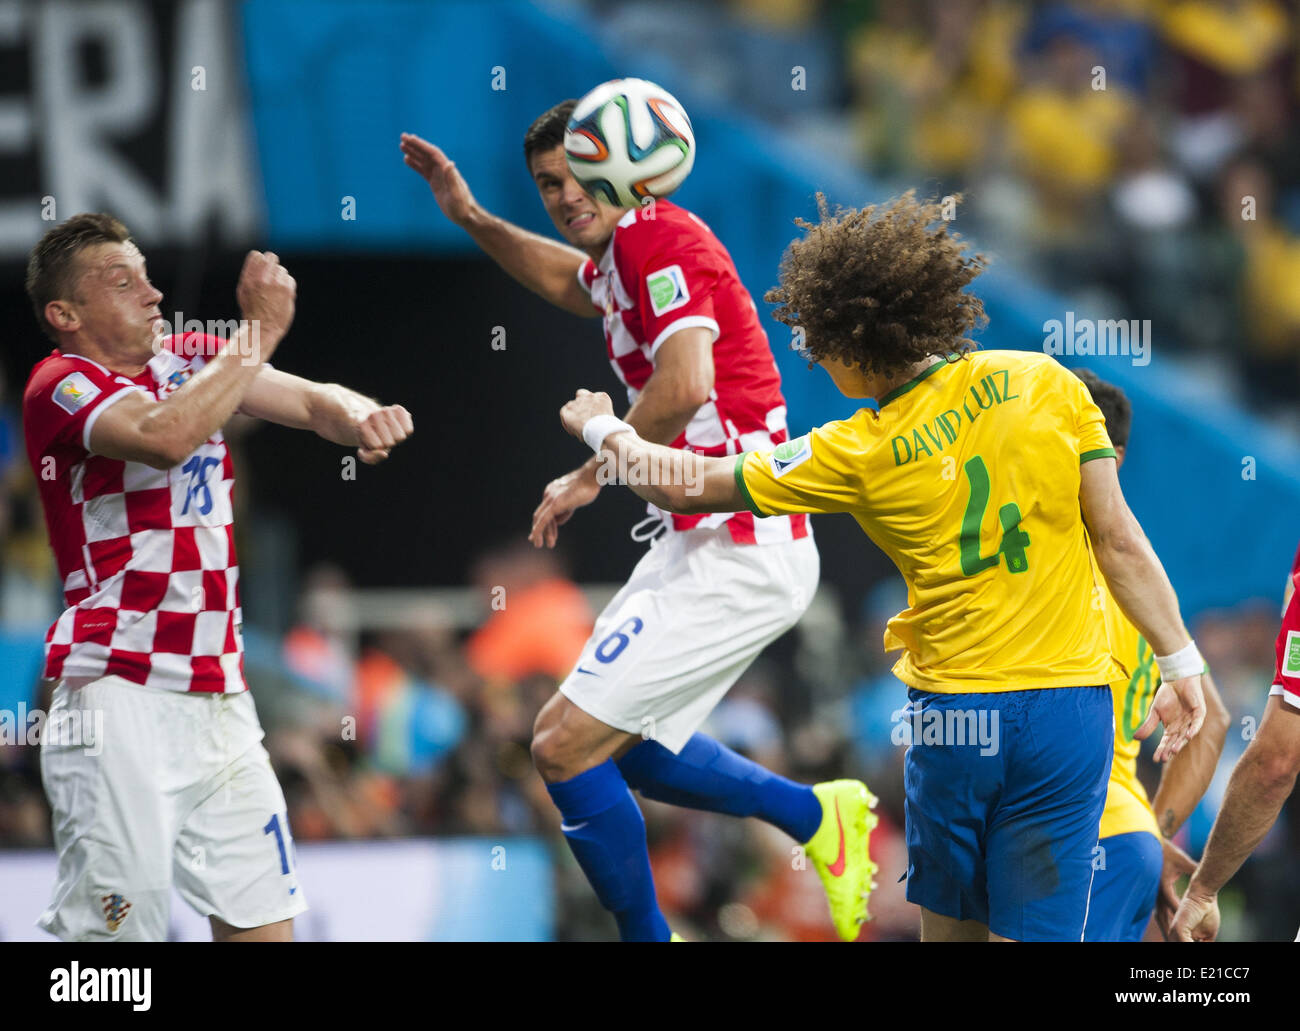 Sao Paulo, Brazil. 12th June, 2014.  Olic, David Luiz and Lovren in the match between Brazil and Croatia in the group stage of the 2014 World Cup, for the group A match at the Arena stadium in Sao Paulo on June 12, 2014 Photo:. Urbanandsport/Nurphoto Credit:  Urbanandsport/NurPhoto/ZUMAPRESS.com/Alamy Live News Stock Photo